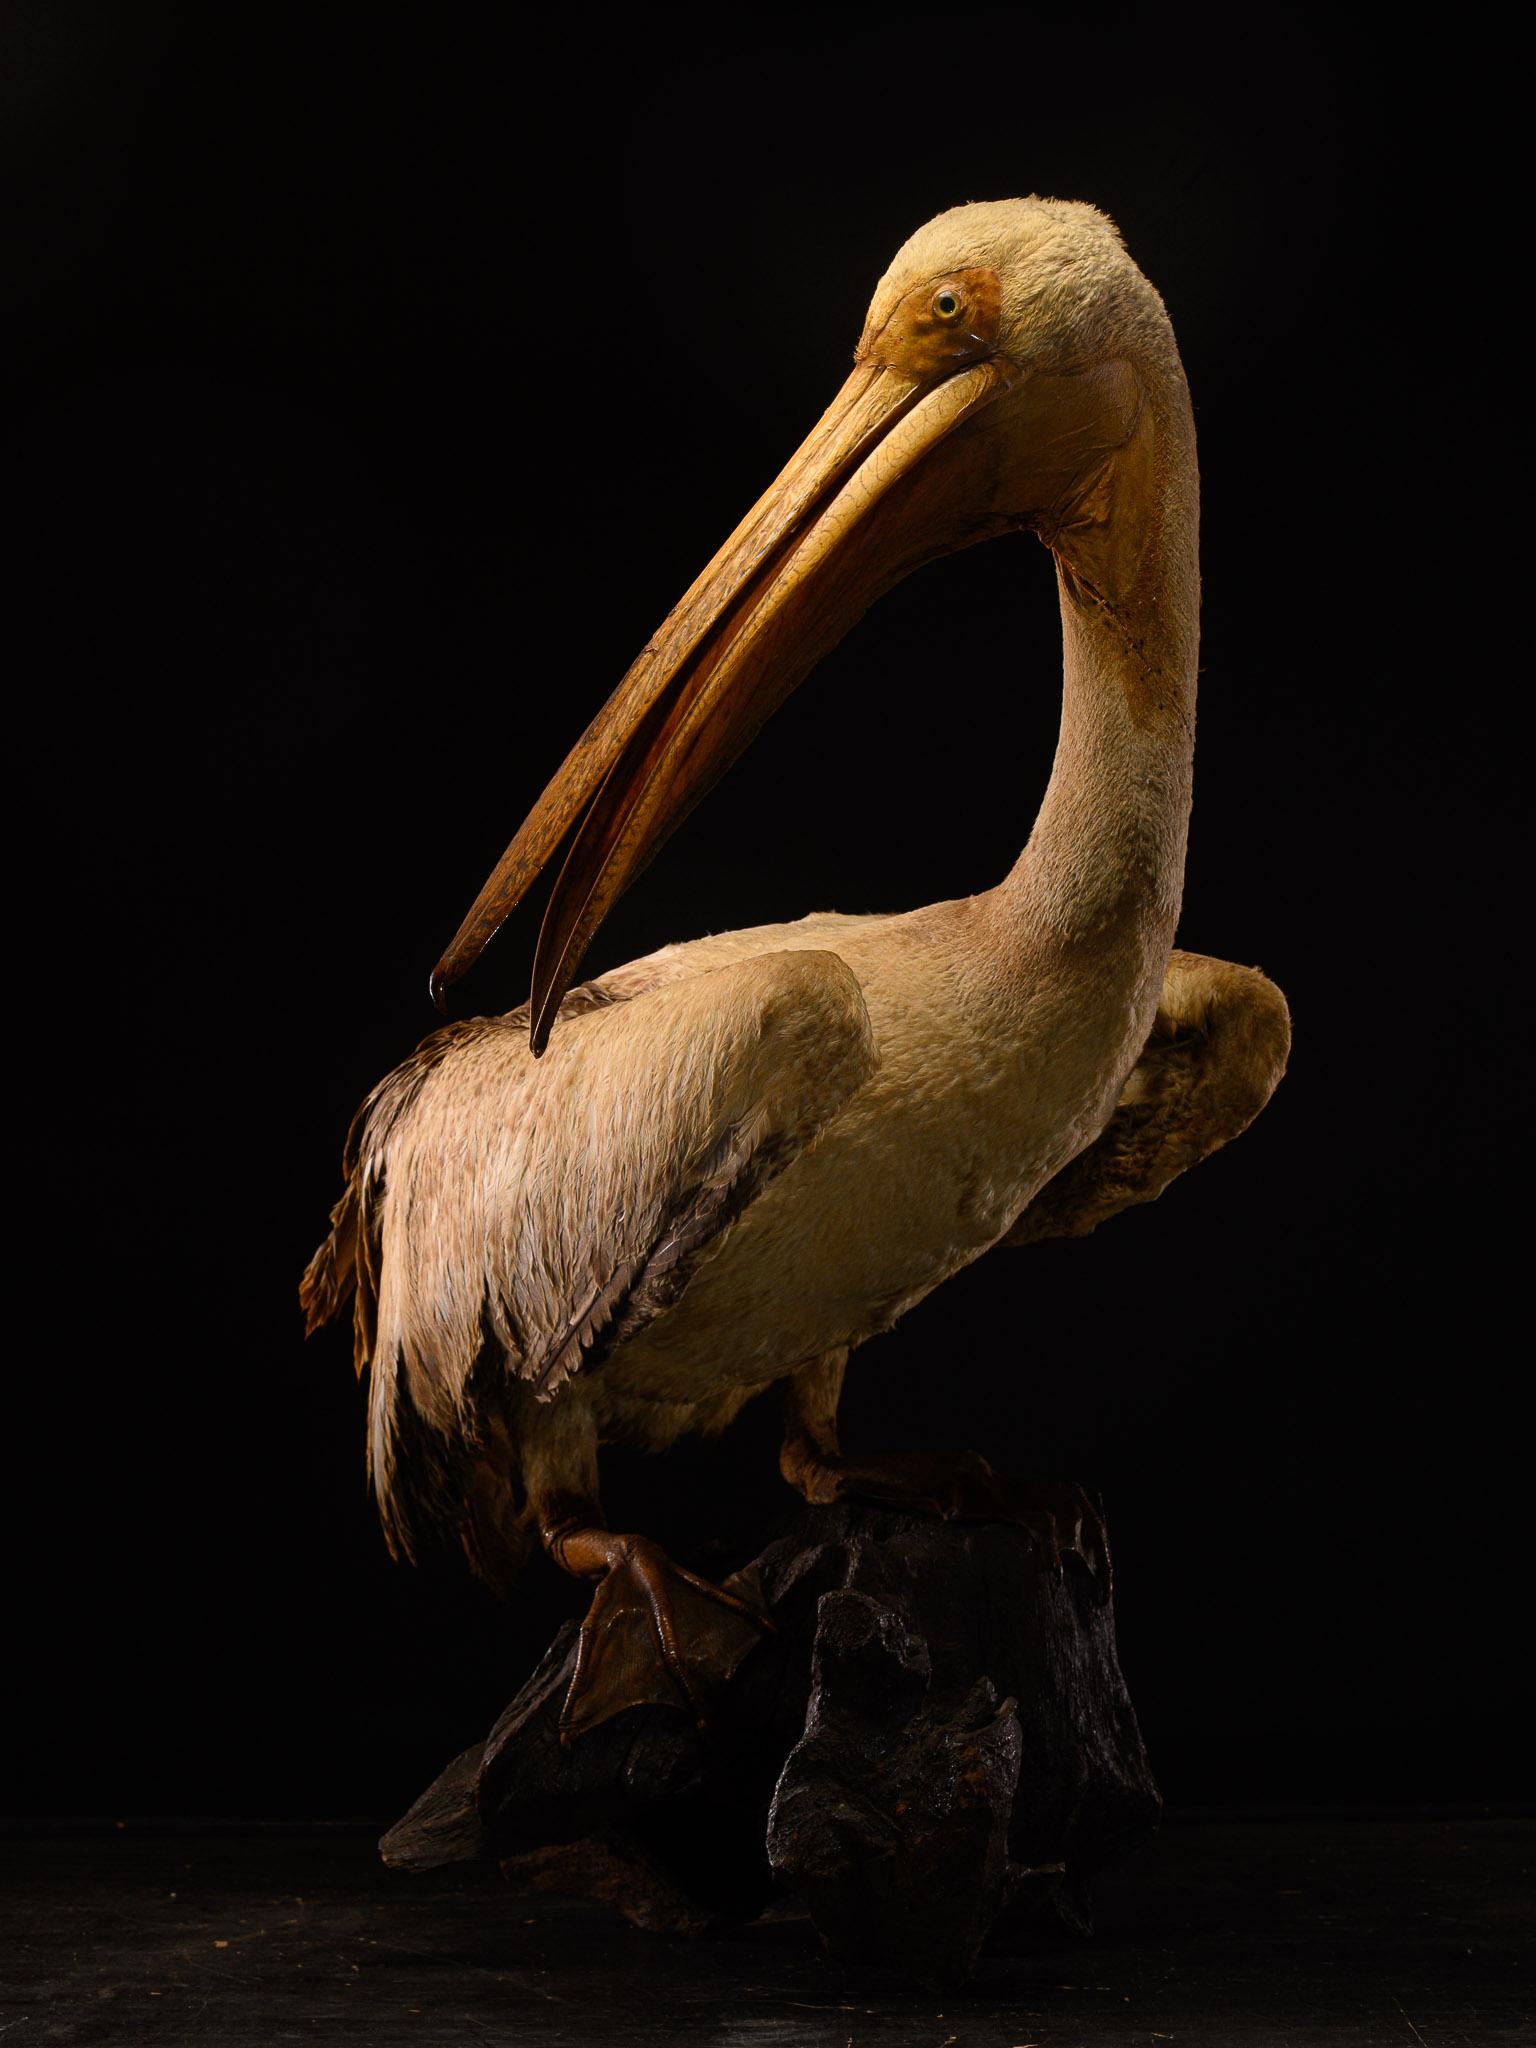 This beak and feet of this mount have a wonderful patina and feathers have been cleaned.

Pelicans are large water birds characterized by a long beak and a large throat pouch used for catching prey and draining water from the scooped-up contents